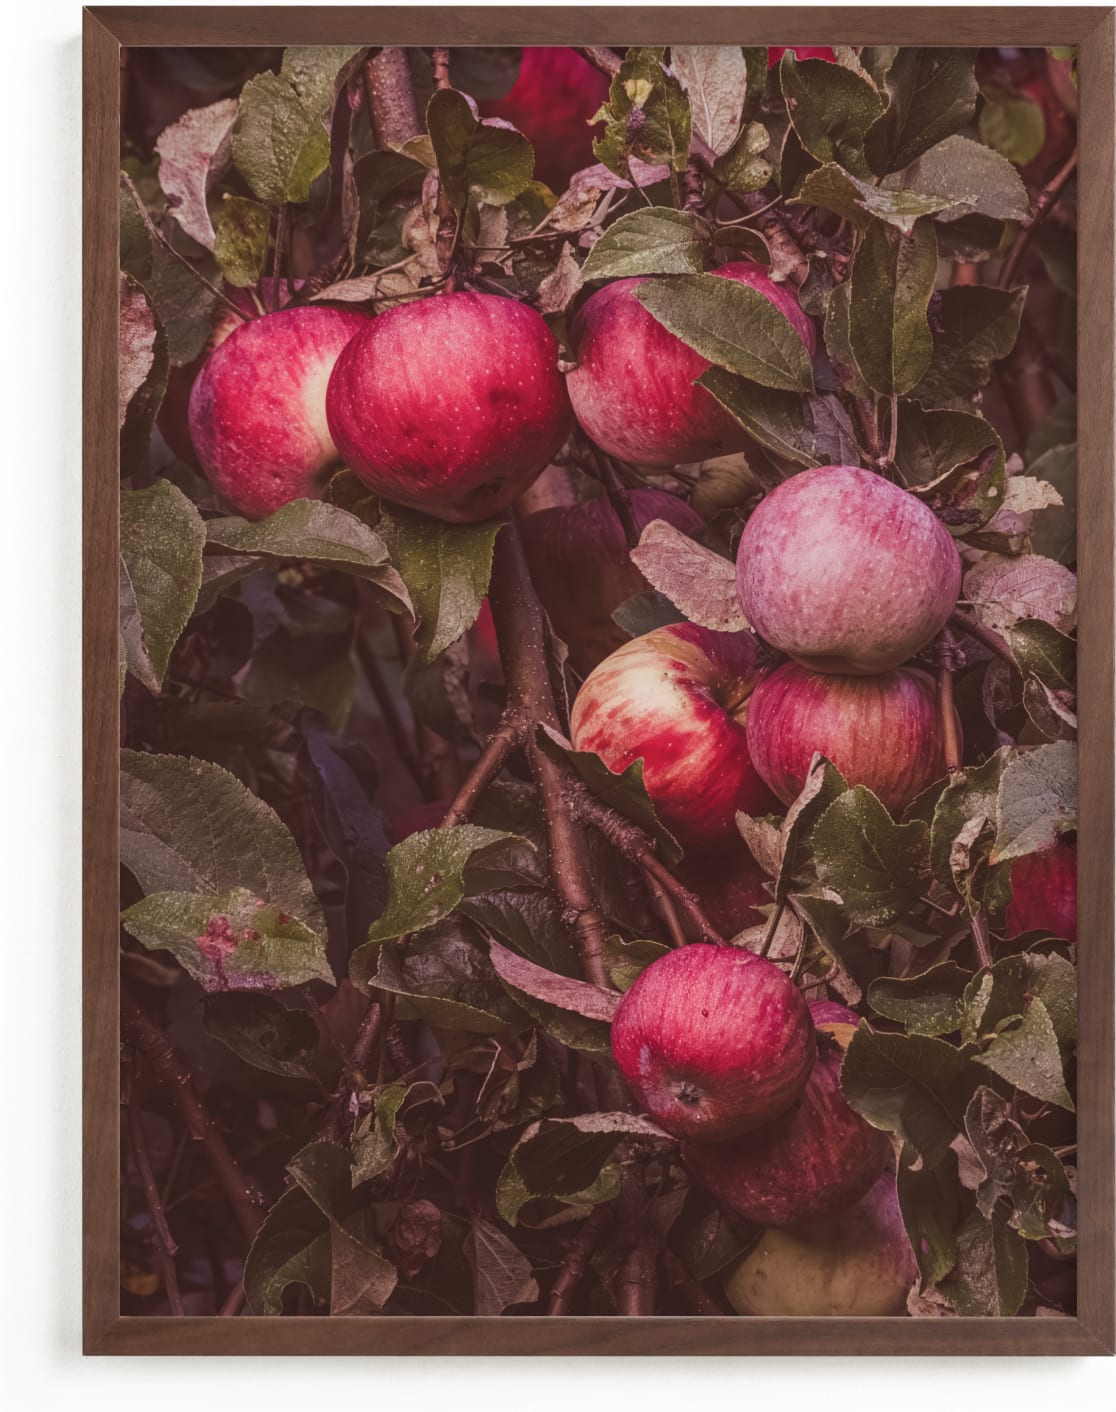 This is a brown art by Justine Bicknell called Apple Season.